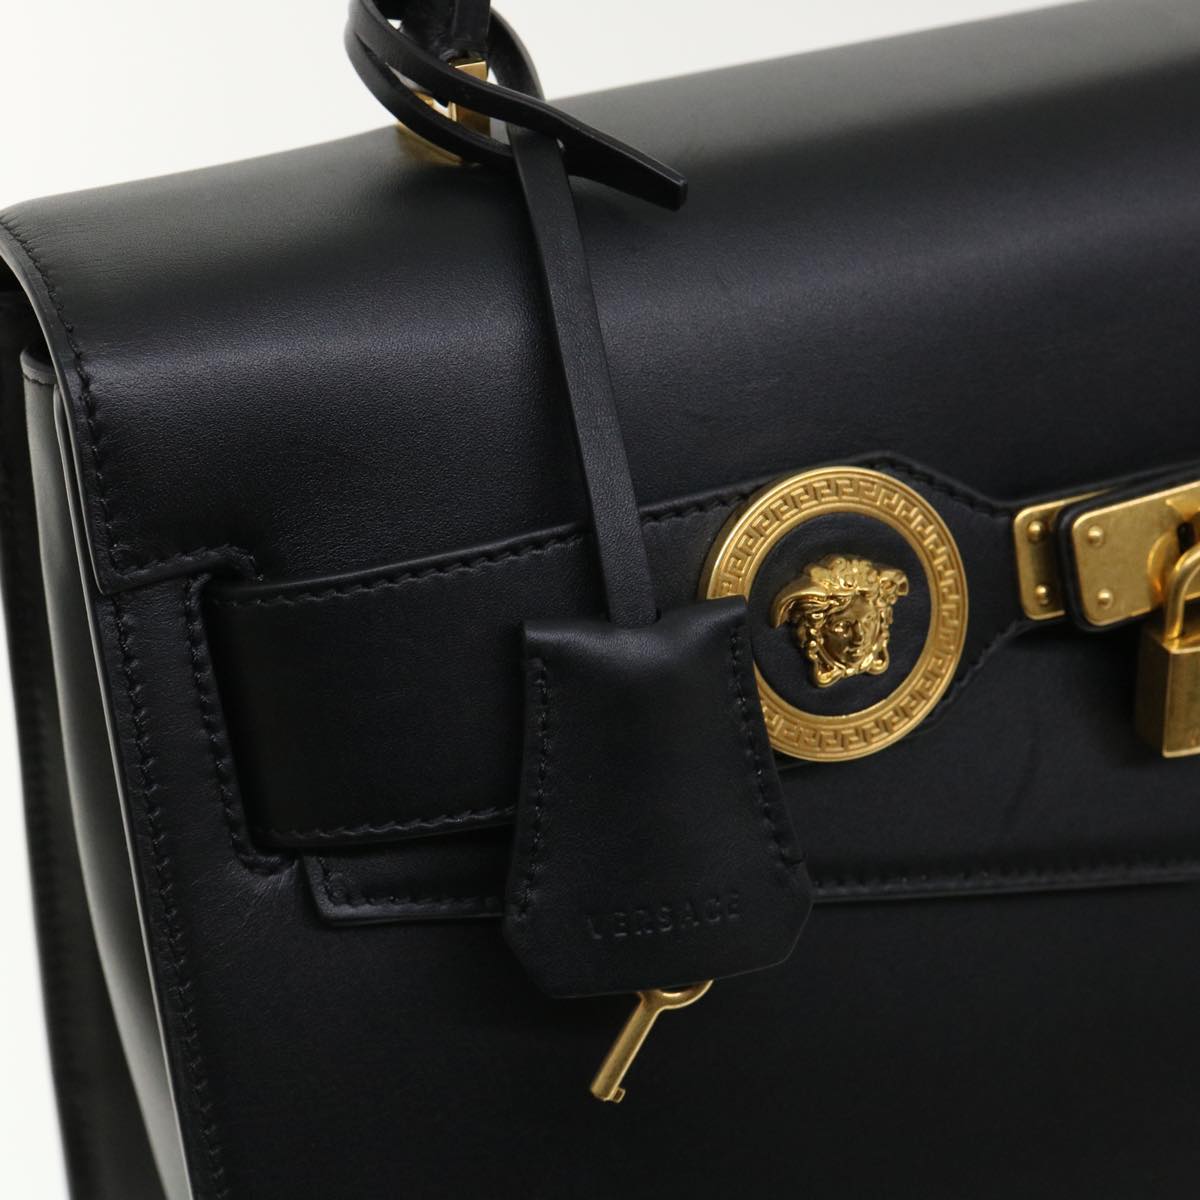 Versace Hand Bag Leather 2way Black Dbfg311 Auth 31495a